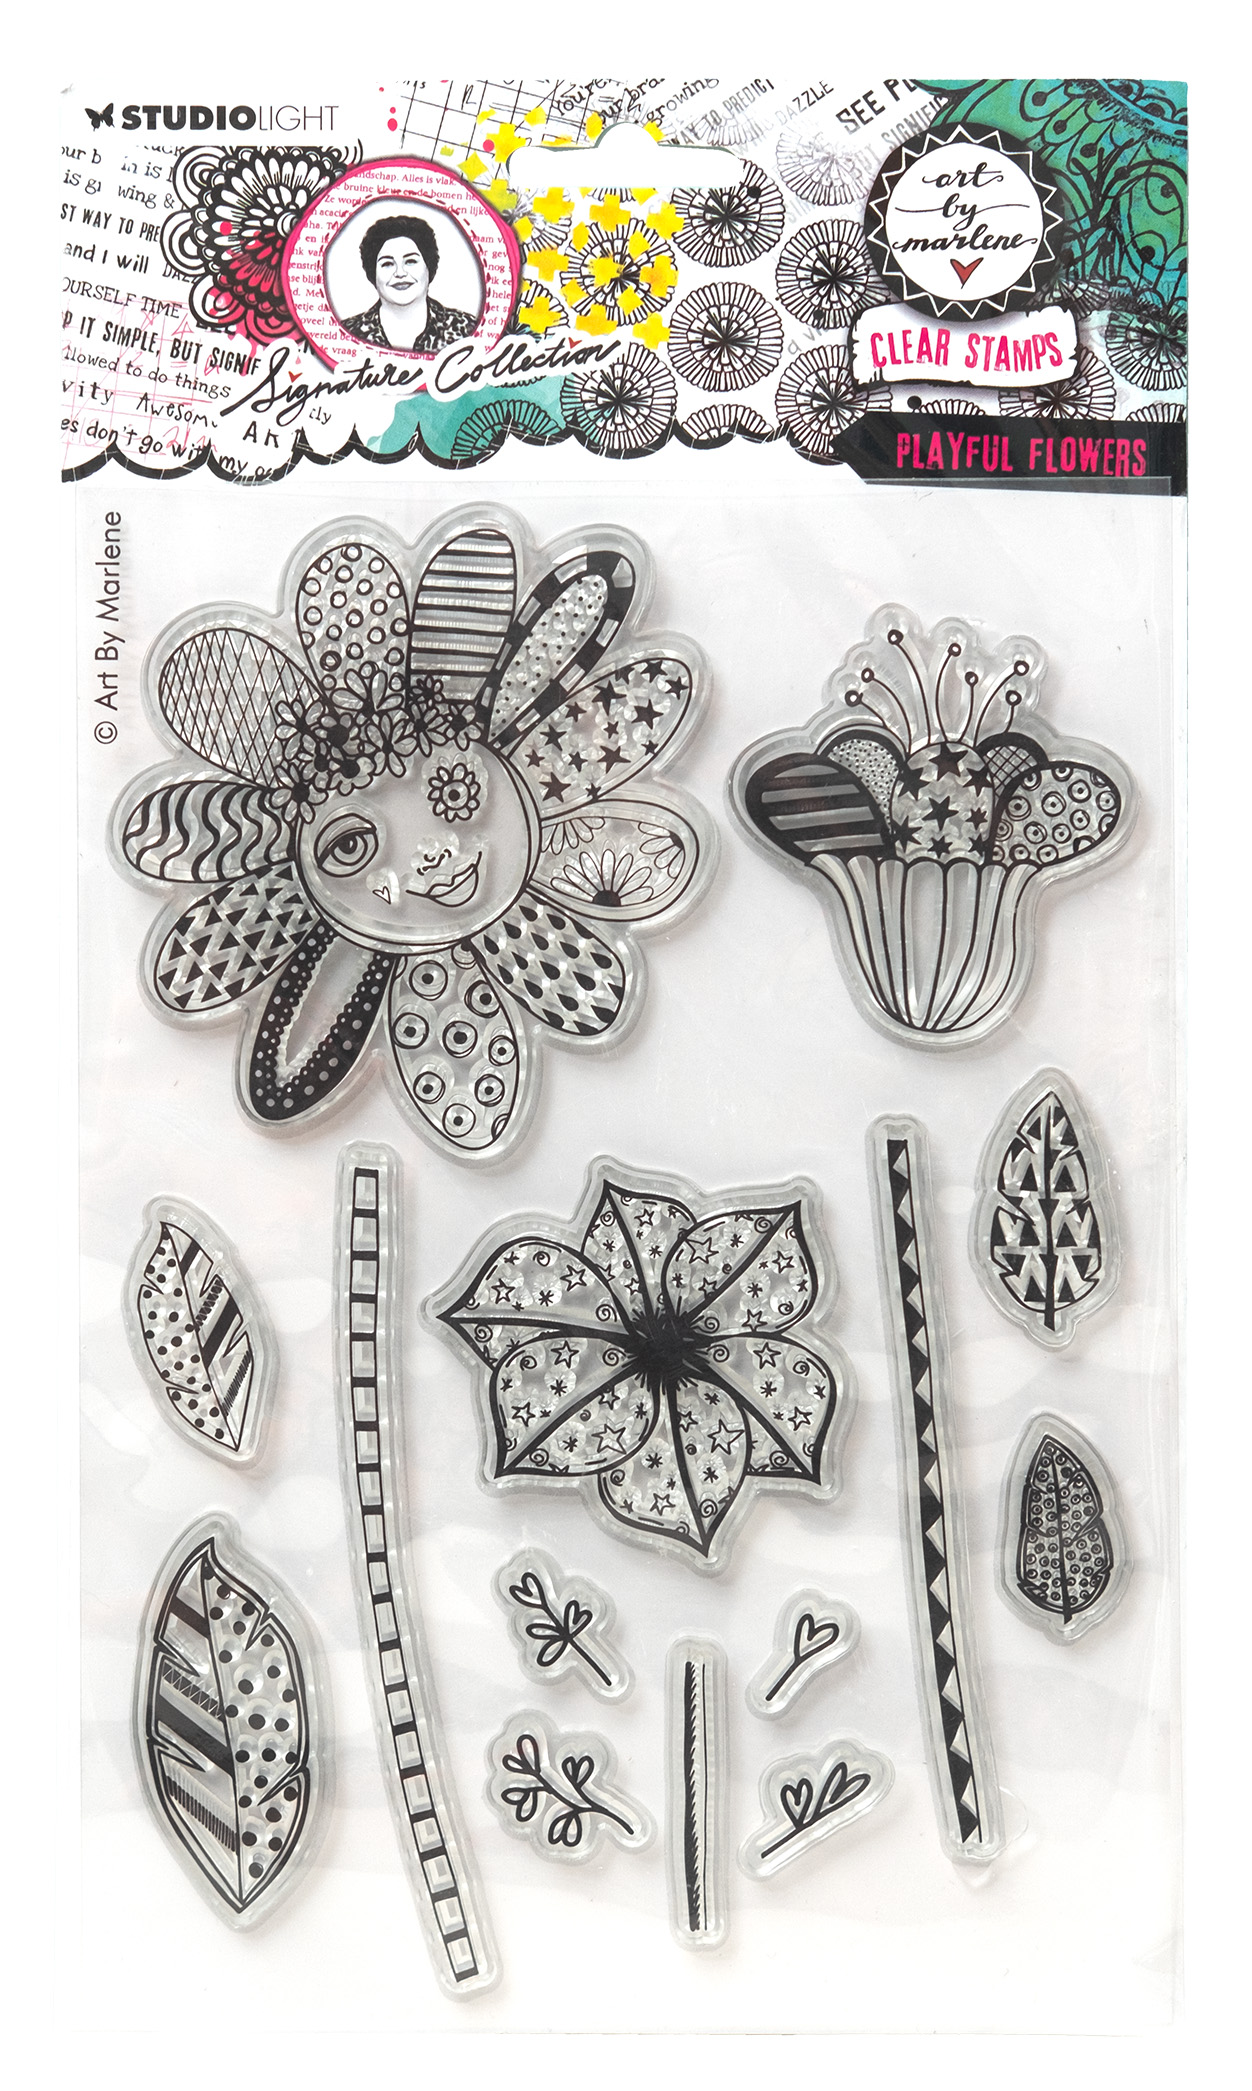 ABM-SI-STAMP715 - Art by Marlene - Playful flowers Signature Collection nr.715